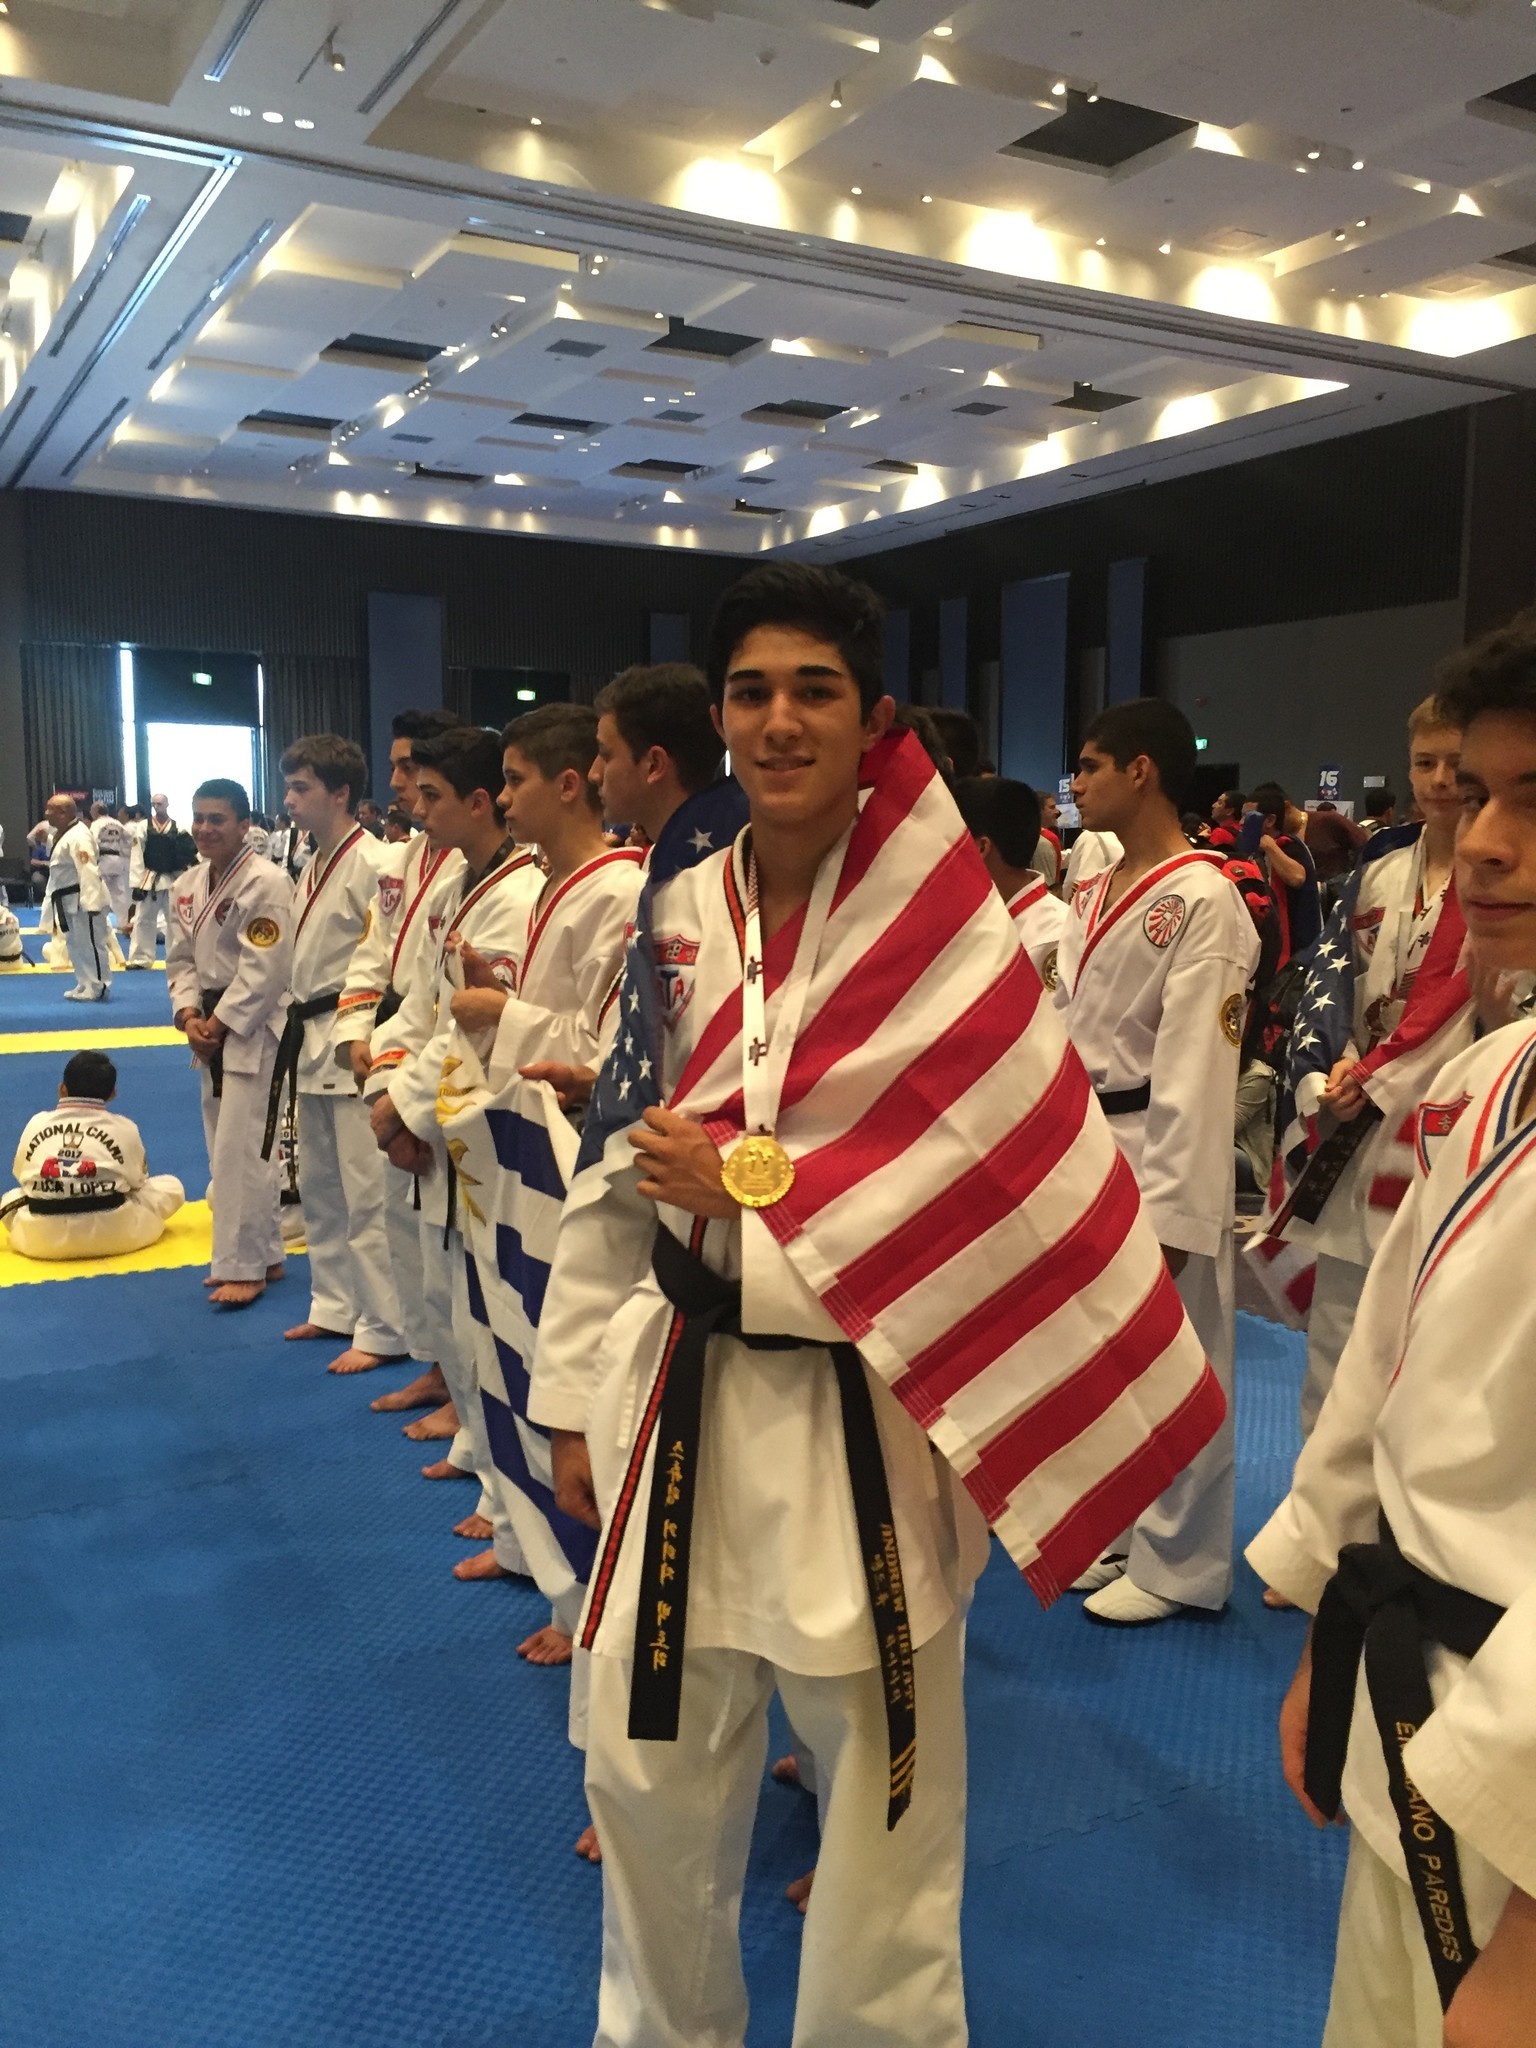 Andrew Heiati was proud to represent the U.S. at the PanAm Championships in Peru last October.